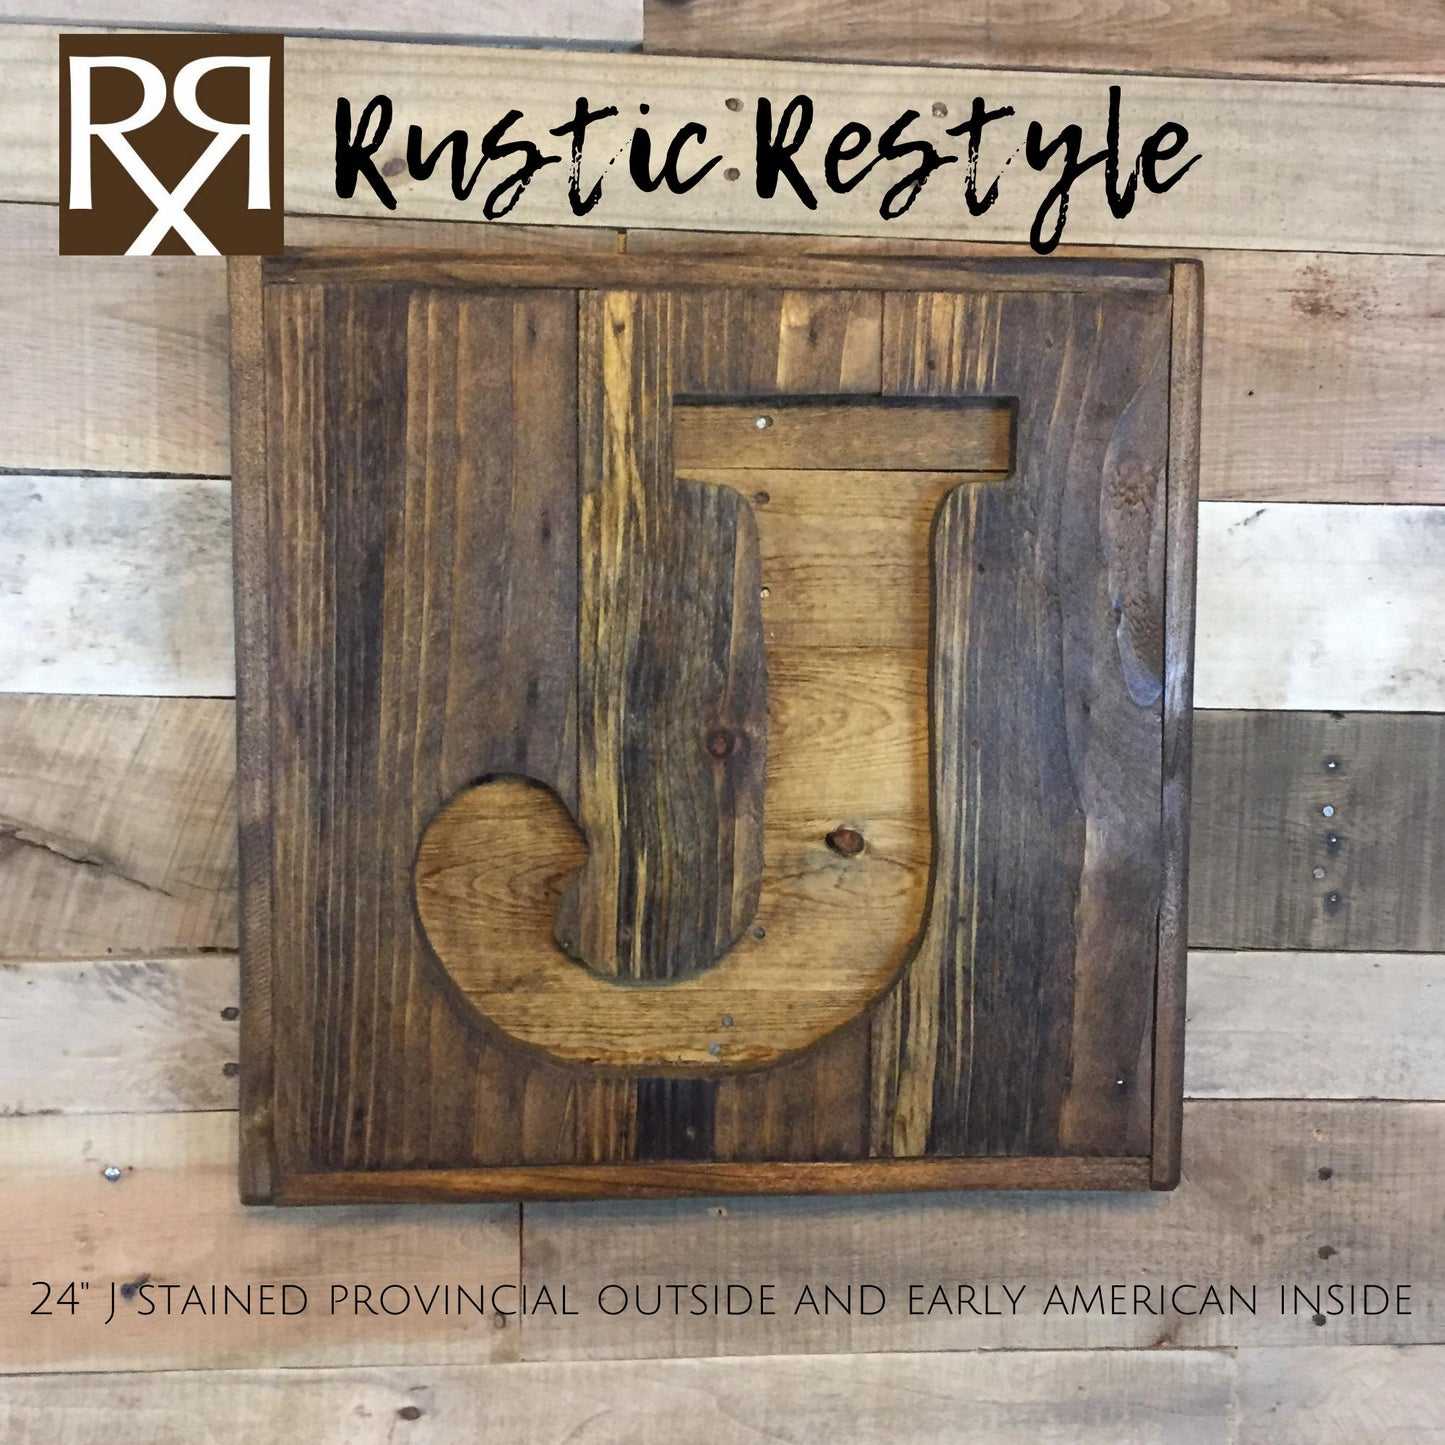 Custom Recycled pallet initial J sign, Wooden Letter sign, Monogram sign, Gift for home, Rustic home decor, Wood pallet sign, custom sign